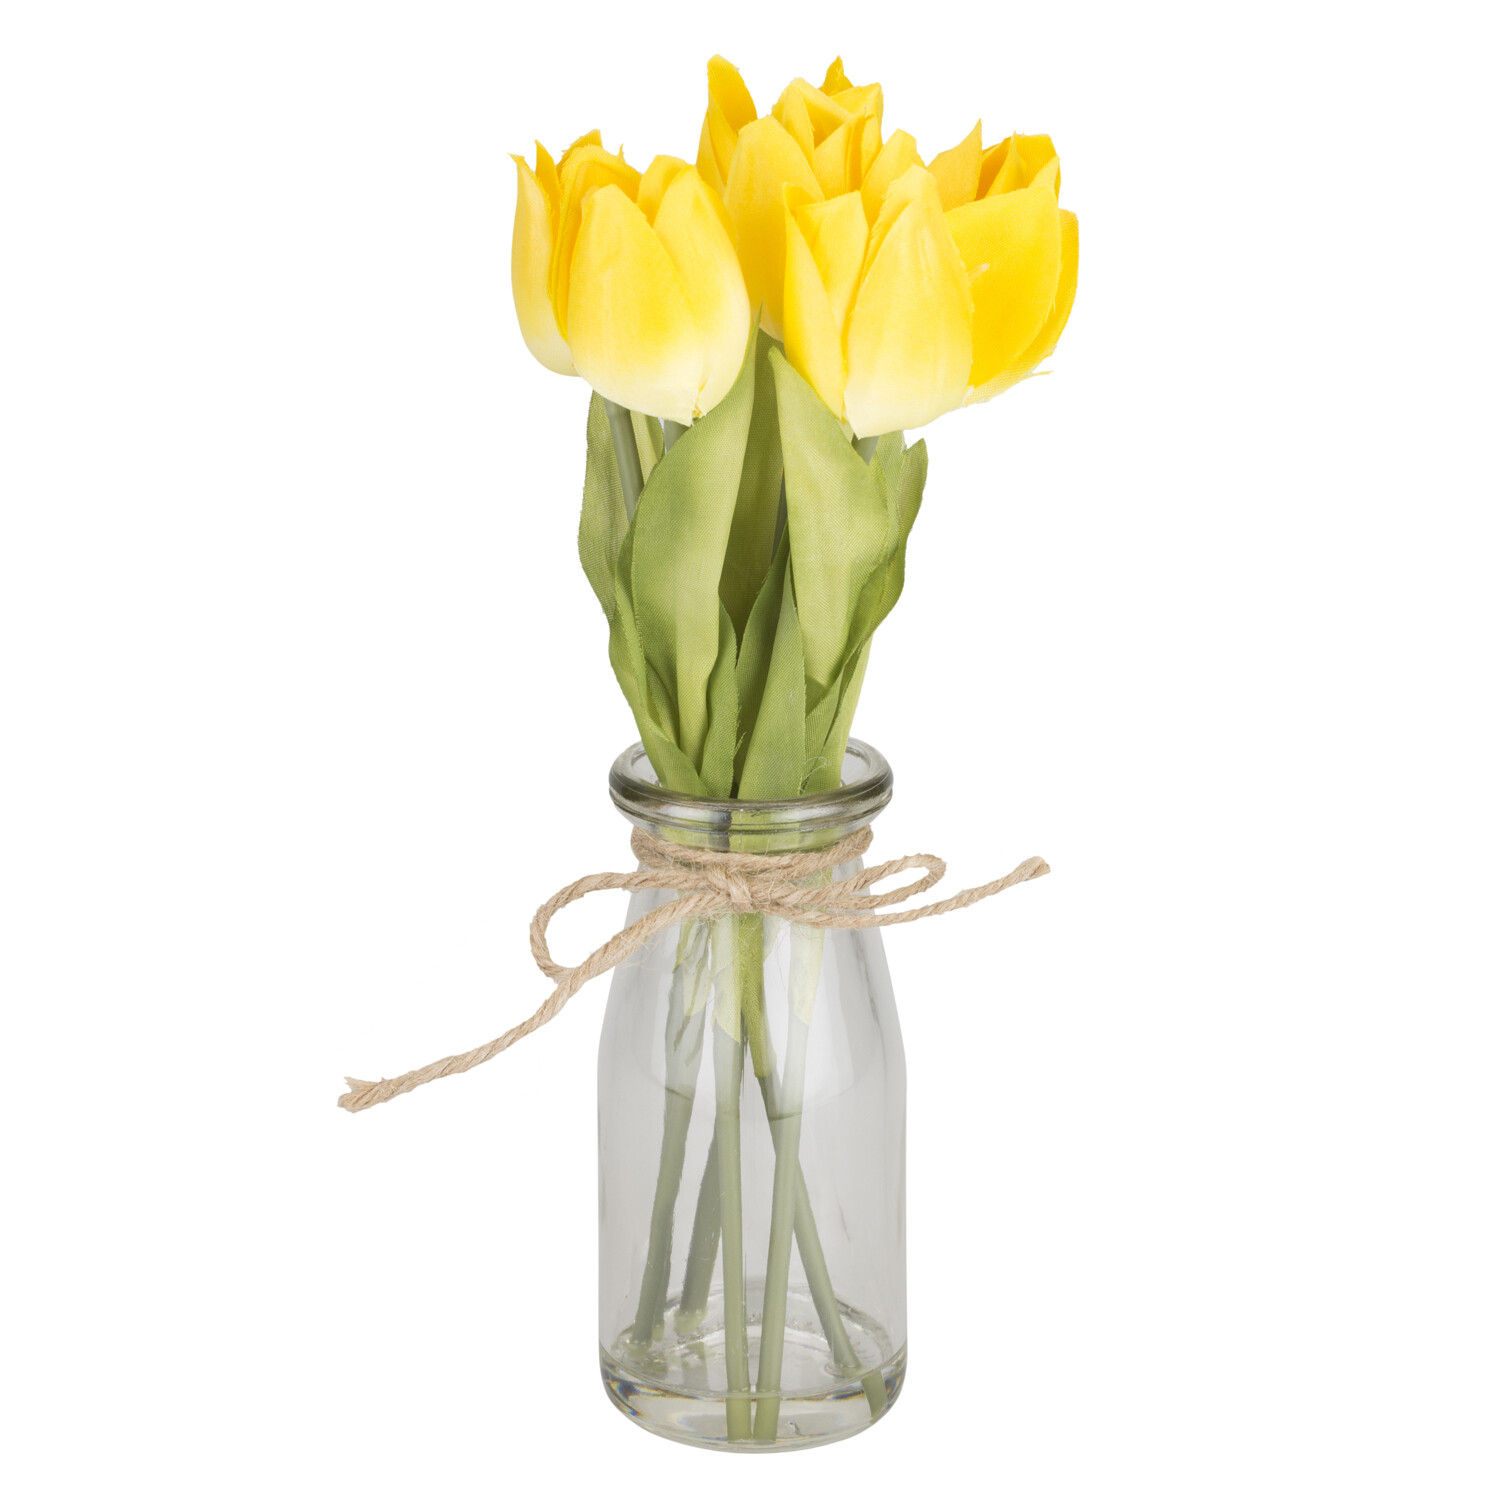 Tulip Artificial Flower in Glass Image